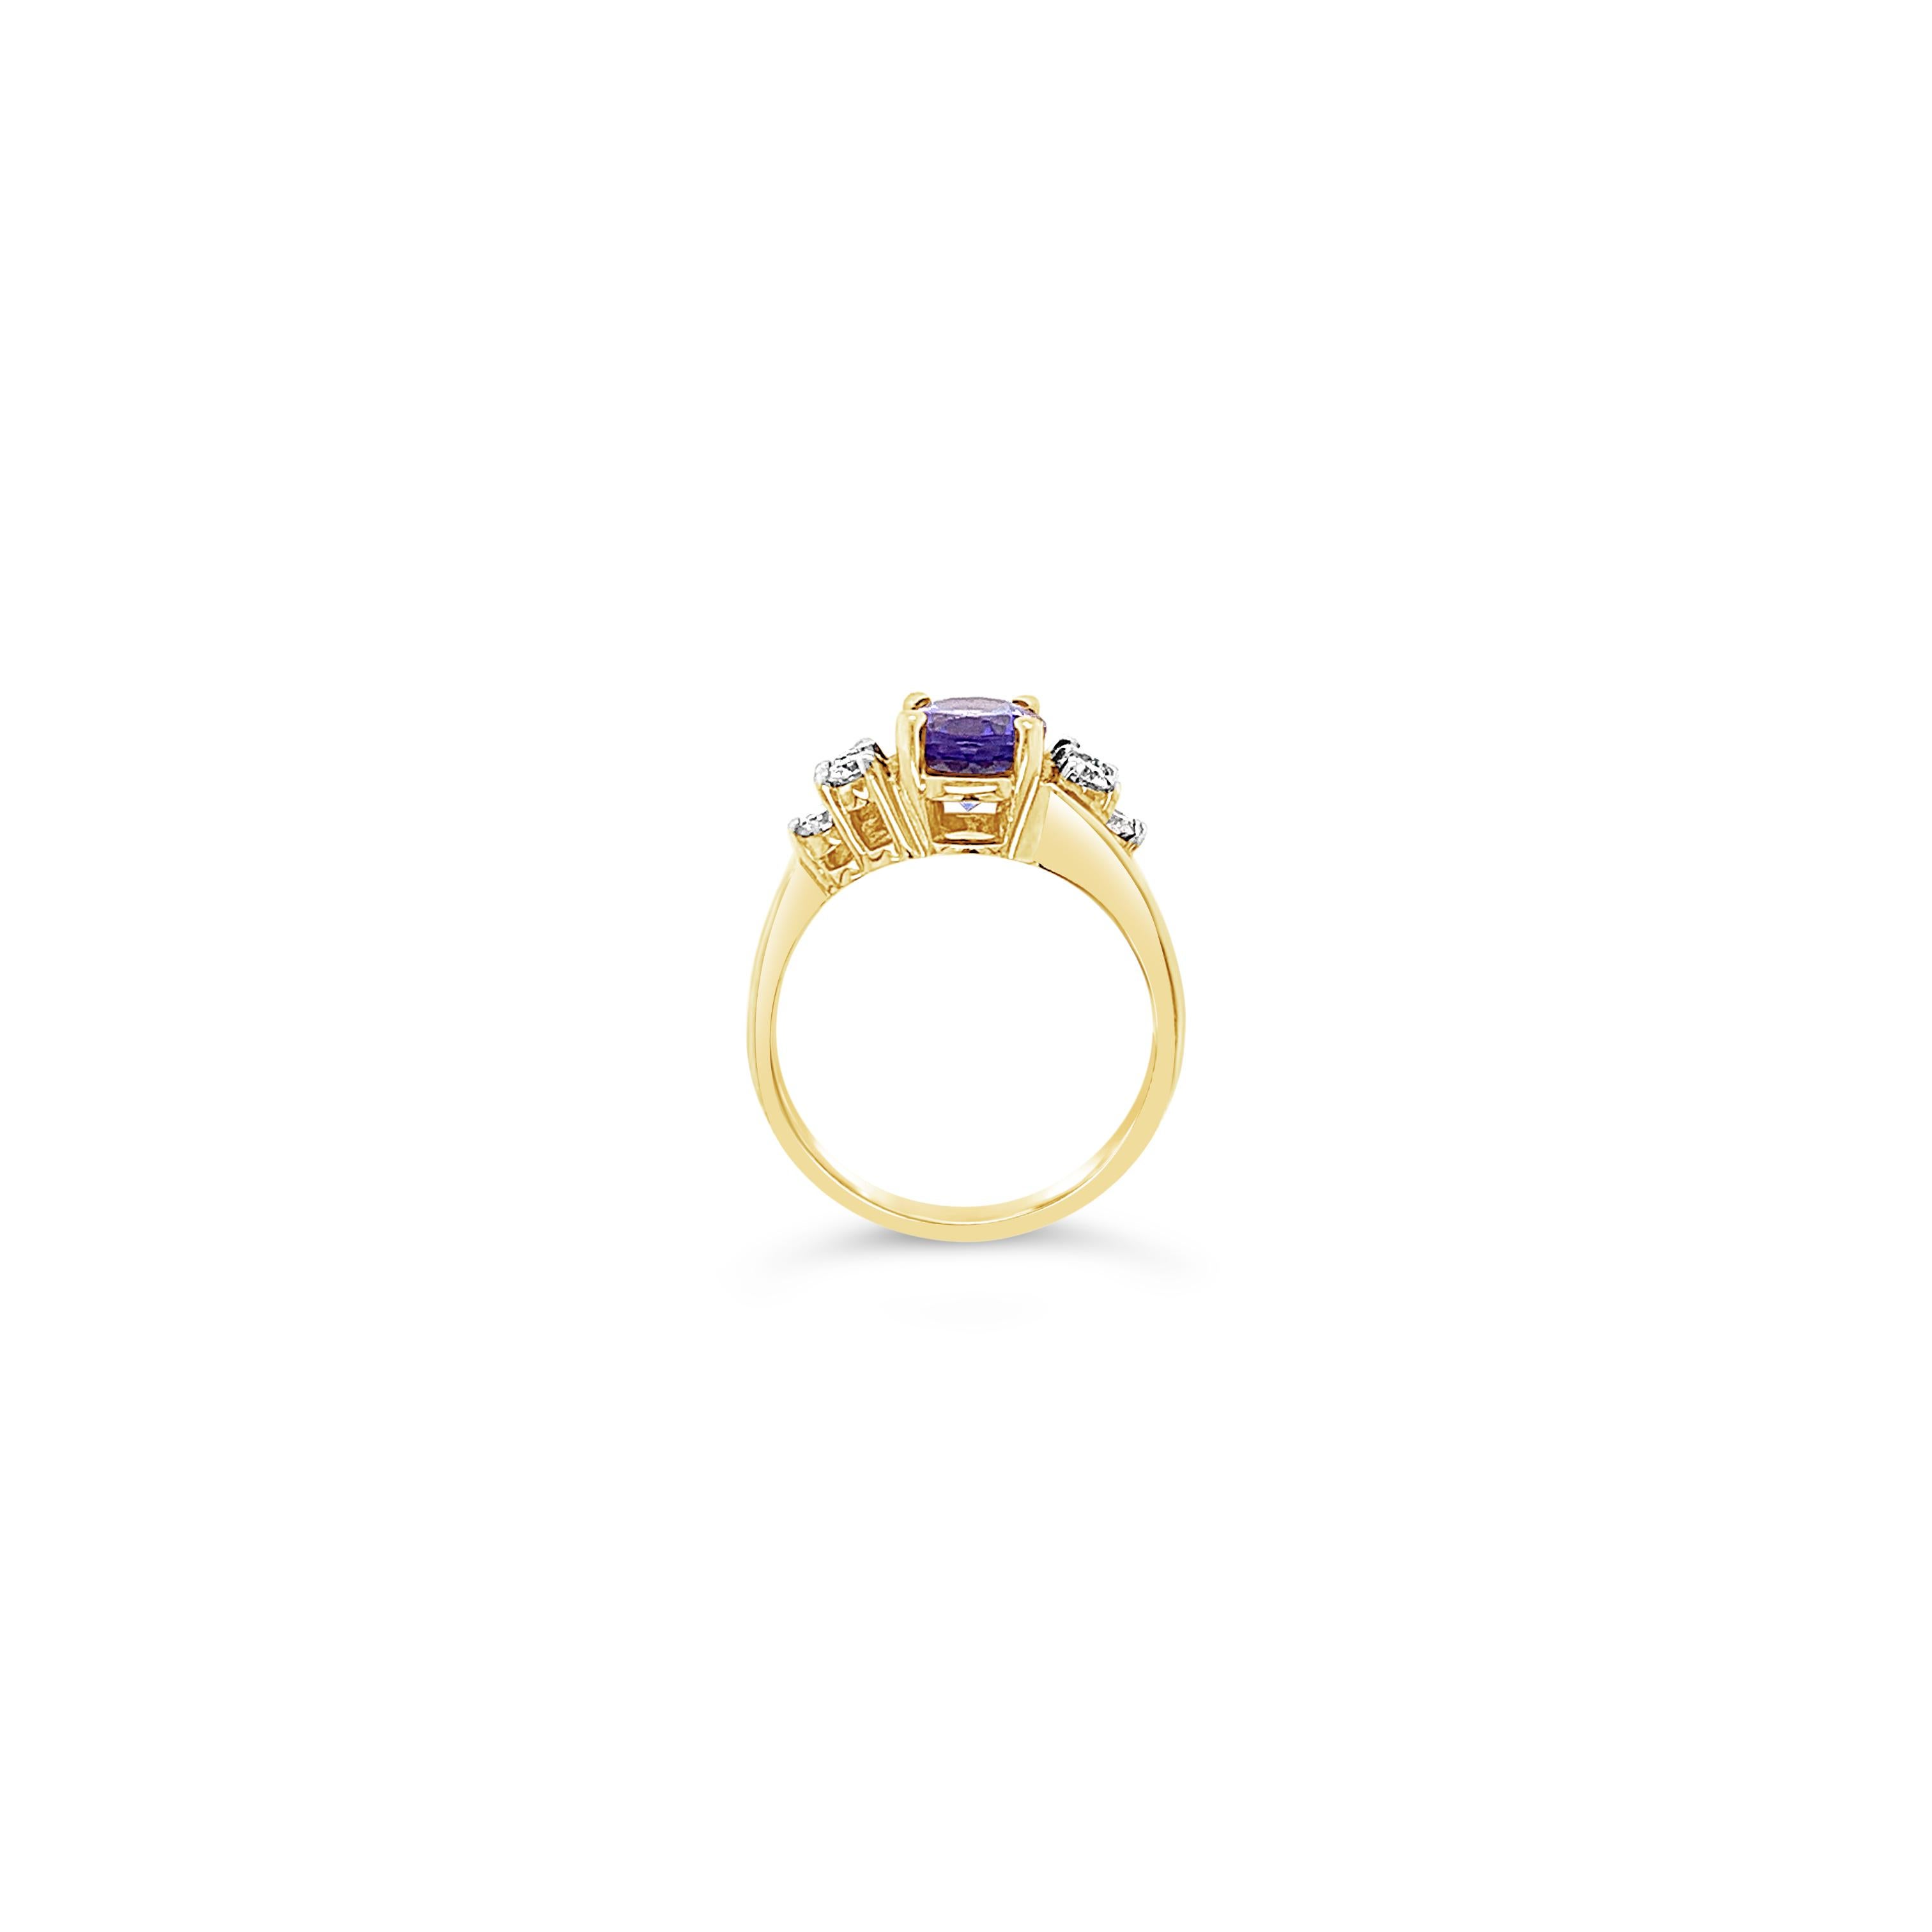 Le Vian Ring featuring 1 7/8 cts. Blueberry Tanzanite, 3/8 cts. Vanilla Diamonds set in 14K Honey Gold. Please feel free to reach out with any questions! Item comes with a Le Vian jewelry box as well as a Le Vian suede pouch! Ring Size 7. Ring may